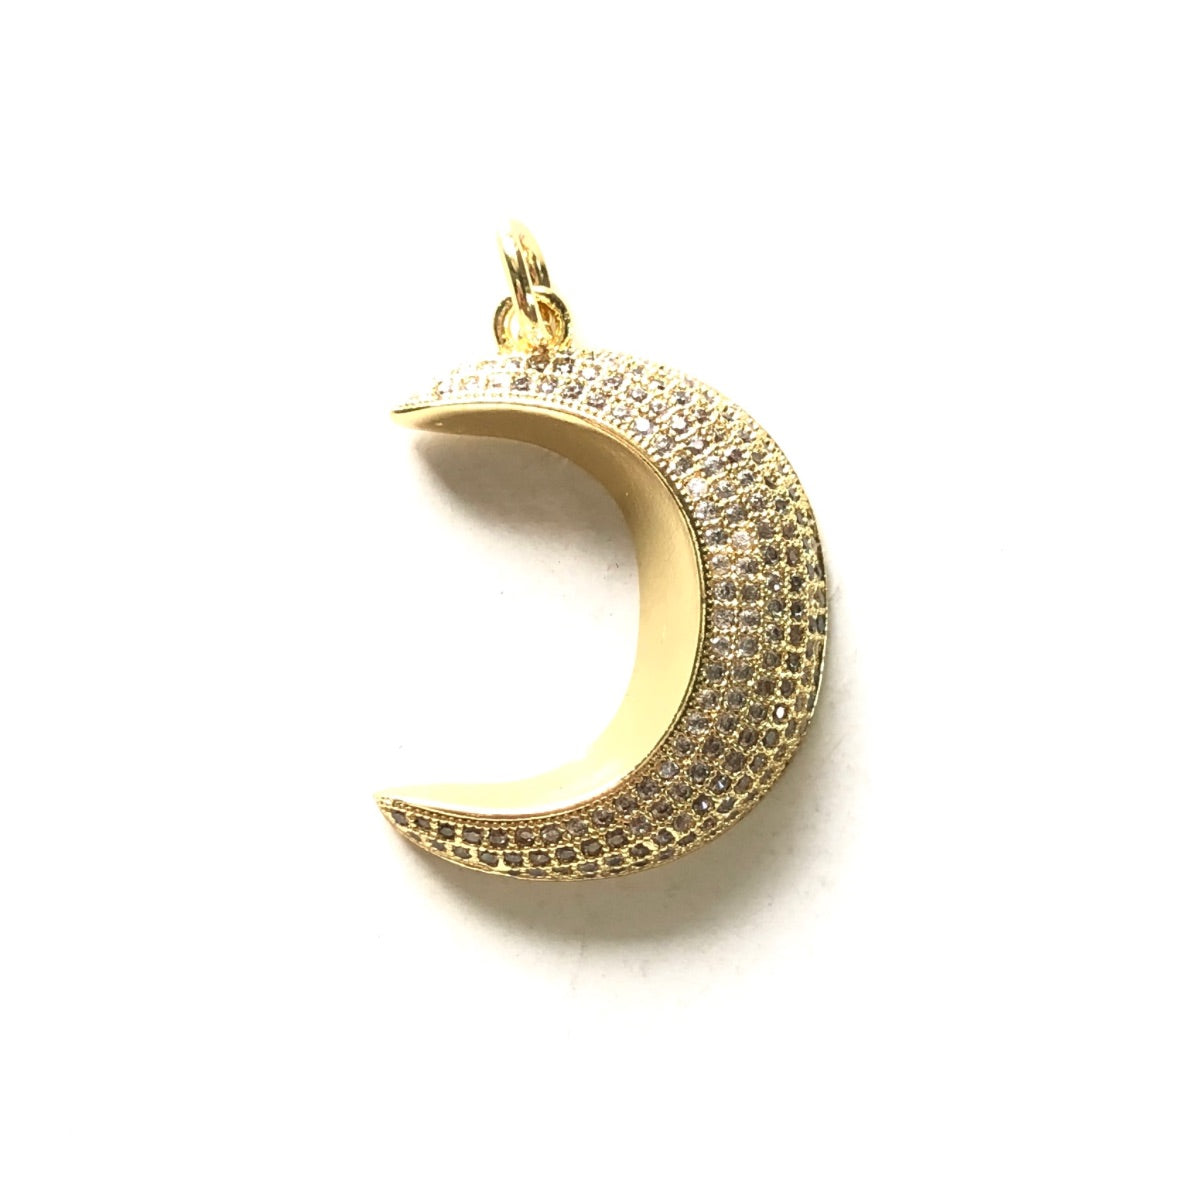 10pcs/lot 28*20.5mm CZ Paved New Moon Crescent Charms Gold CZ Paved Charms Sun Moon Stars Charms Beads Beyond